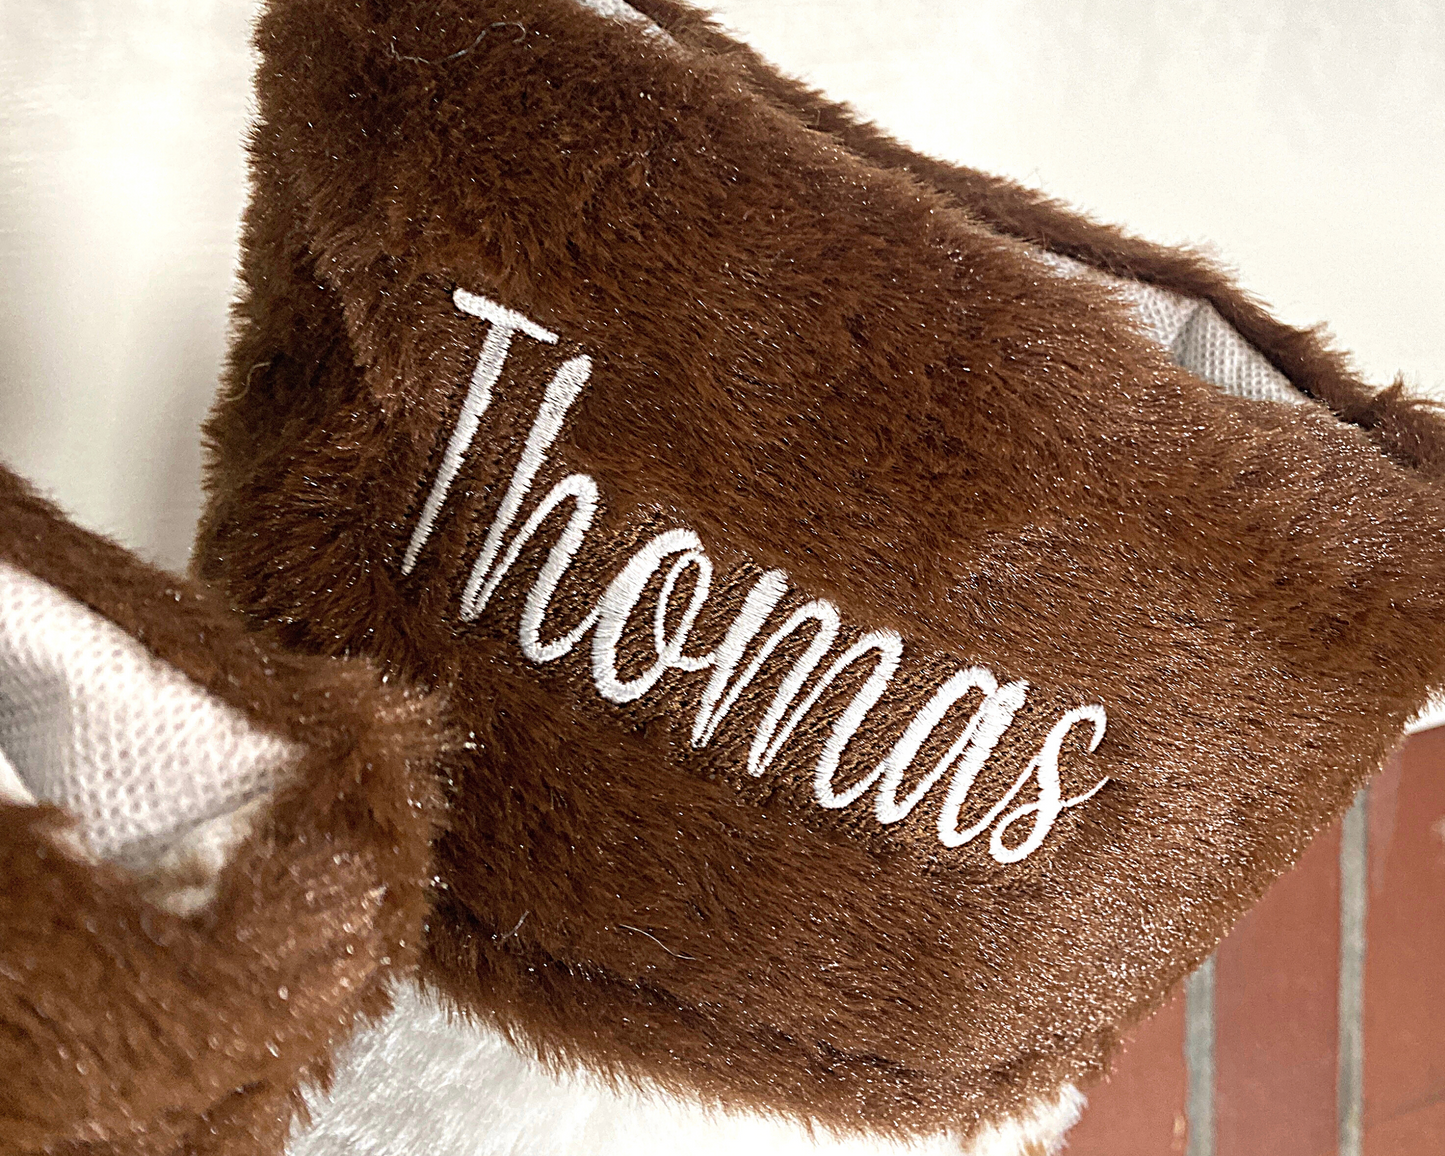 Brown Cow Personalized Stocking | Furry Cow Custom Stocking - Family Stockings - Furry Christmas Stocking